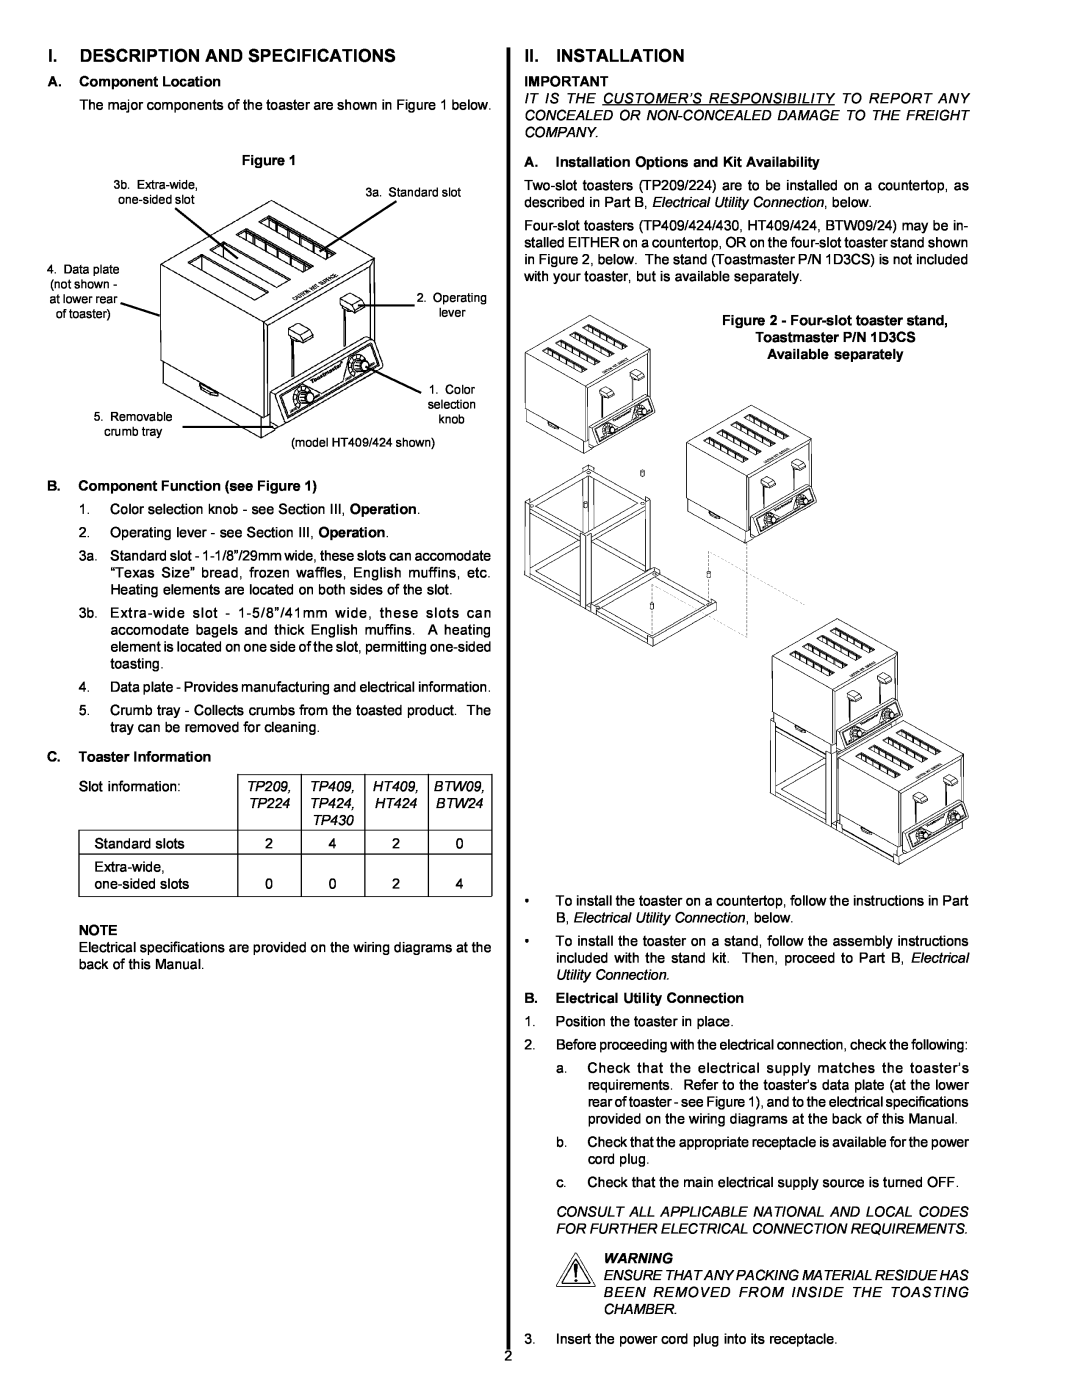 Toastmaster TP409, TP430 I.Description And Specifications, Ii. Installation, A.Component Location, C.Toaster Information 